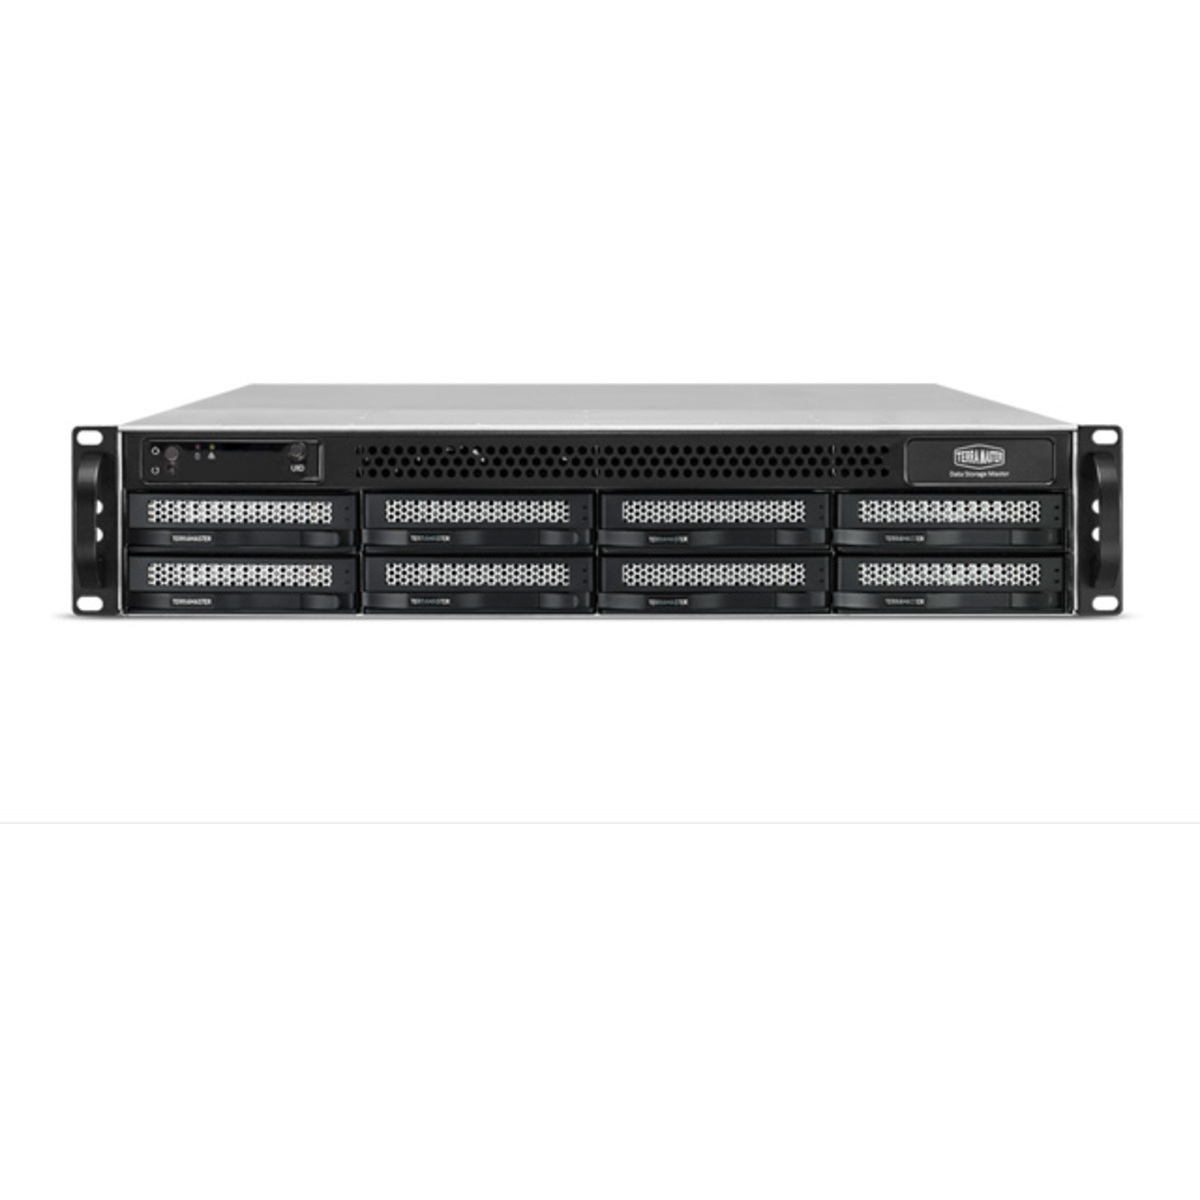 TerraMaster U8-423 100tb 8-Bay RackMount Multimedia / Power User / Business NAS - Network Attached Storage Device 5x20tb Western Digital Red Pro WD201KFGX 3.5 7200rpm SATA 6Gb/s HDD NAS Class Drives Installed - Burn-In Tested - FREE RAM UPGRADE U8-423